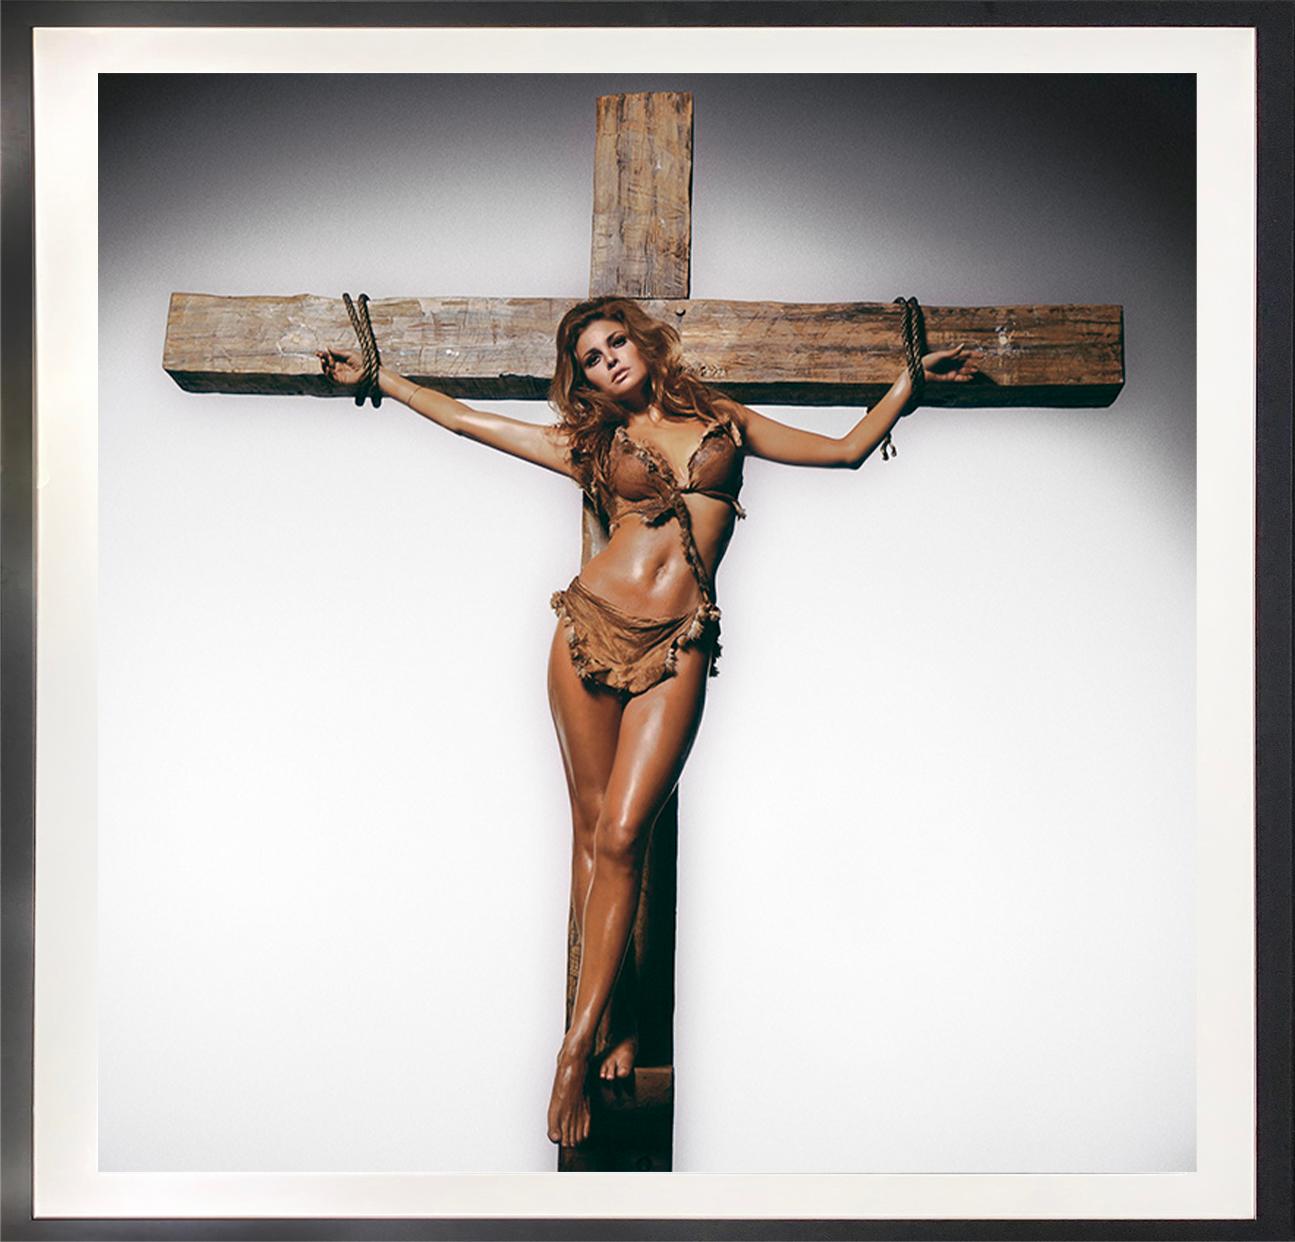 Raquel Welch on the Cross - Photograph by Terry O'Neill